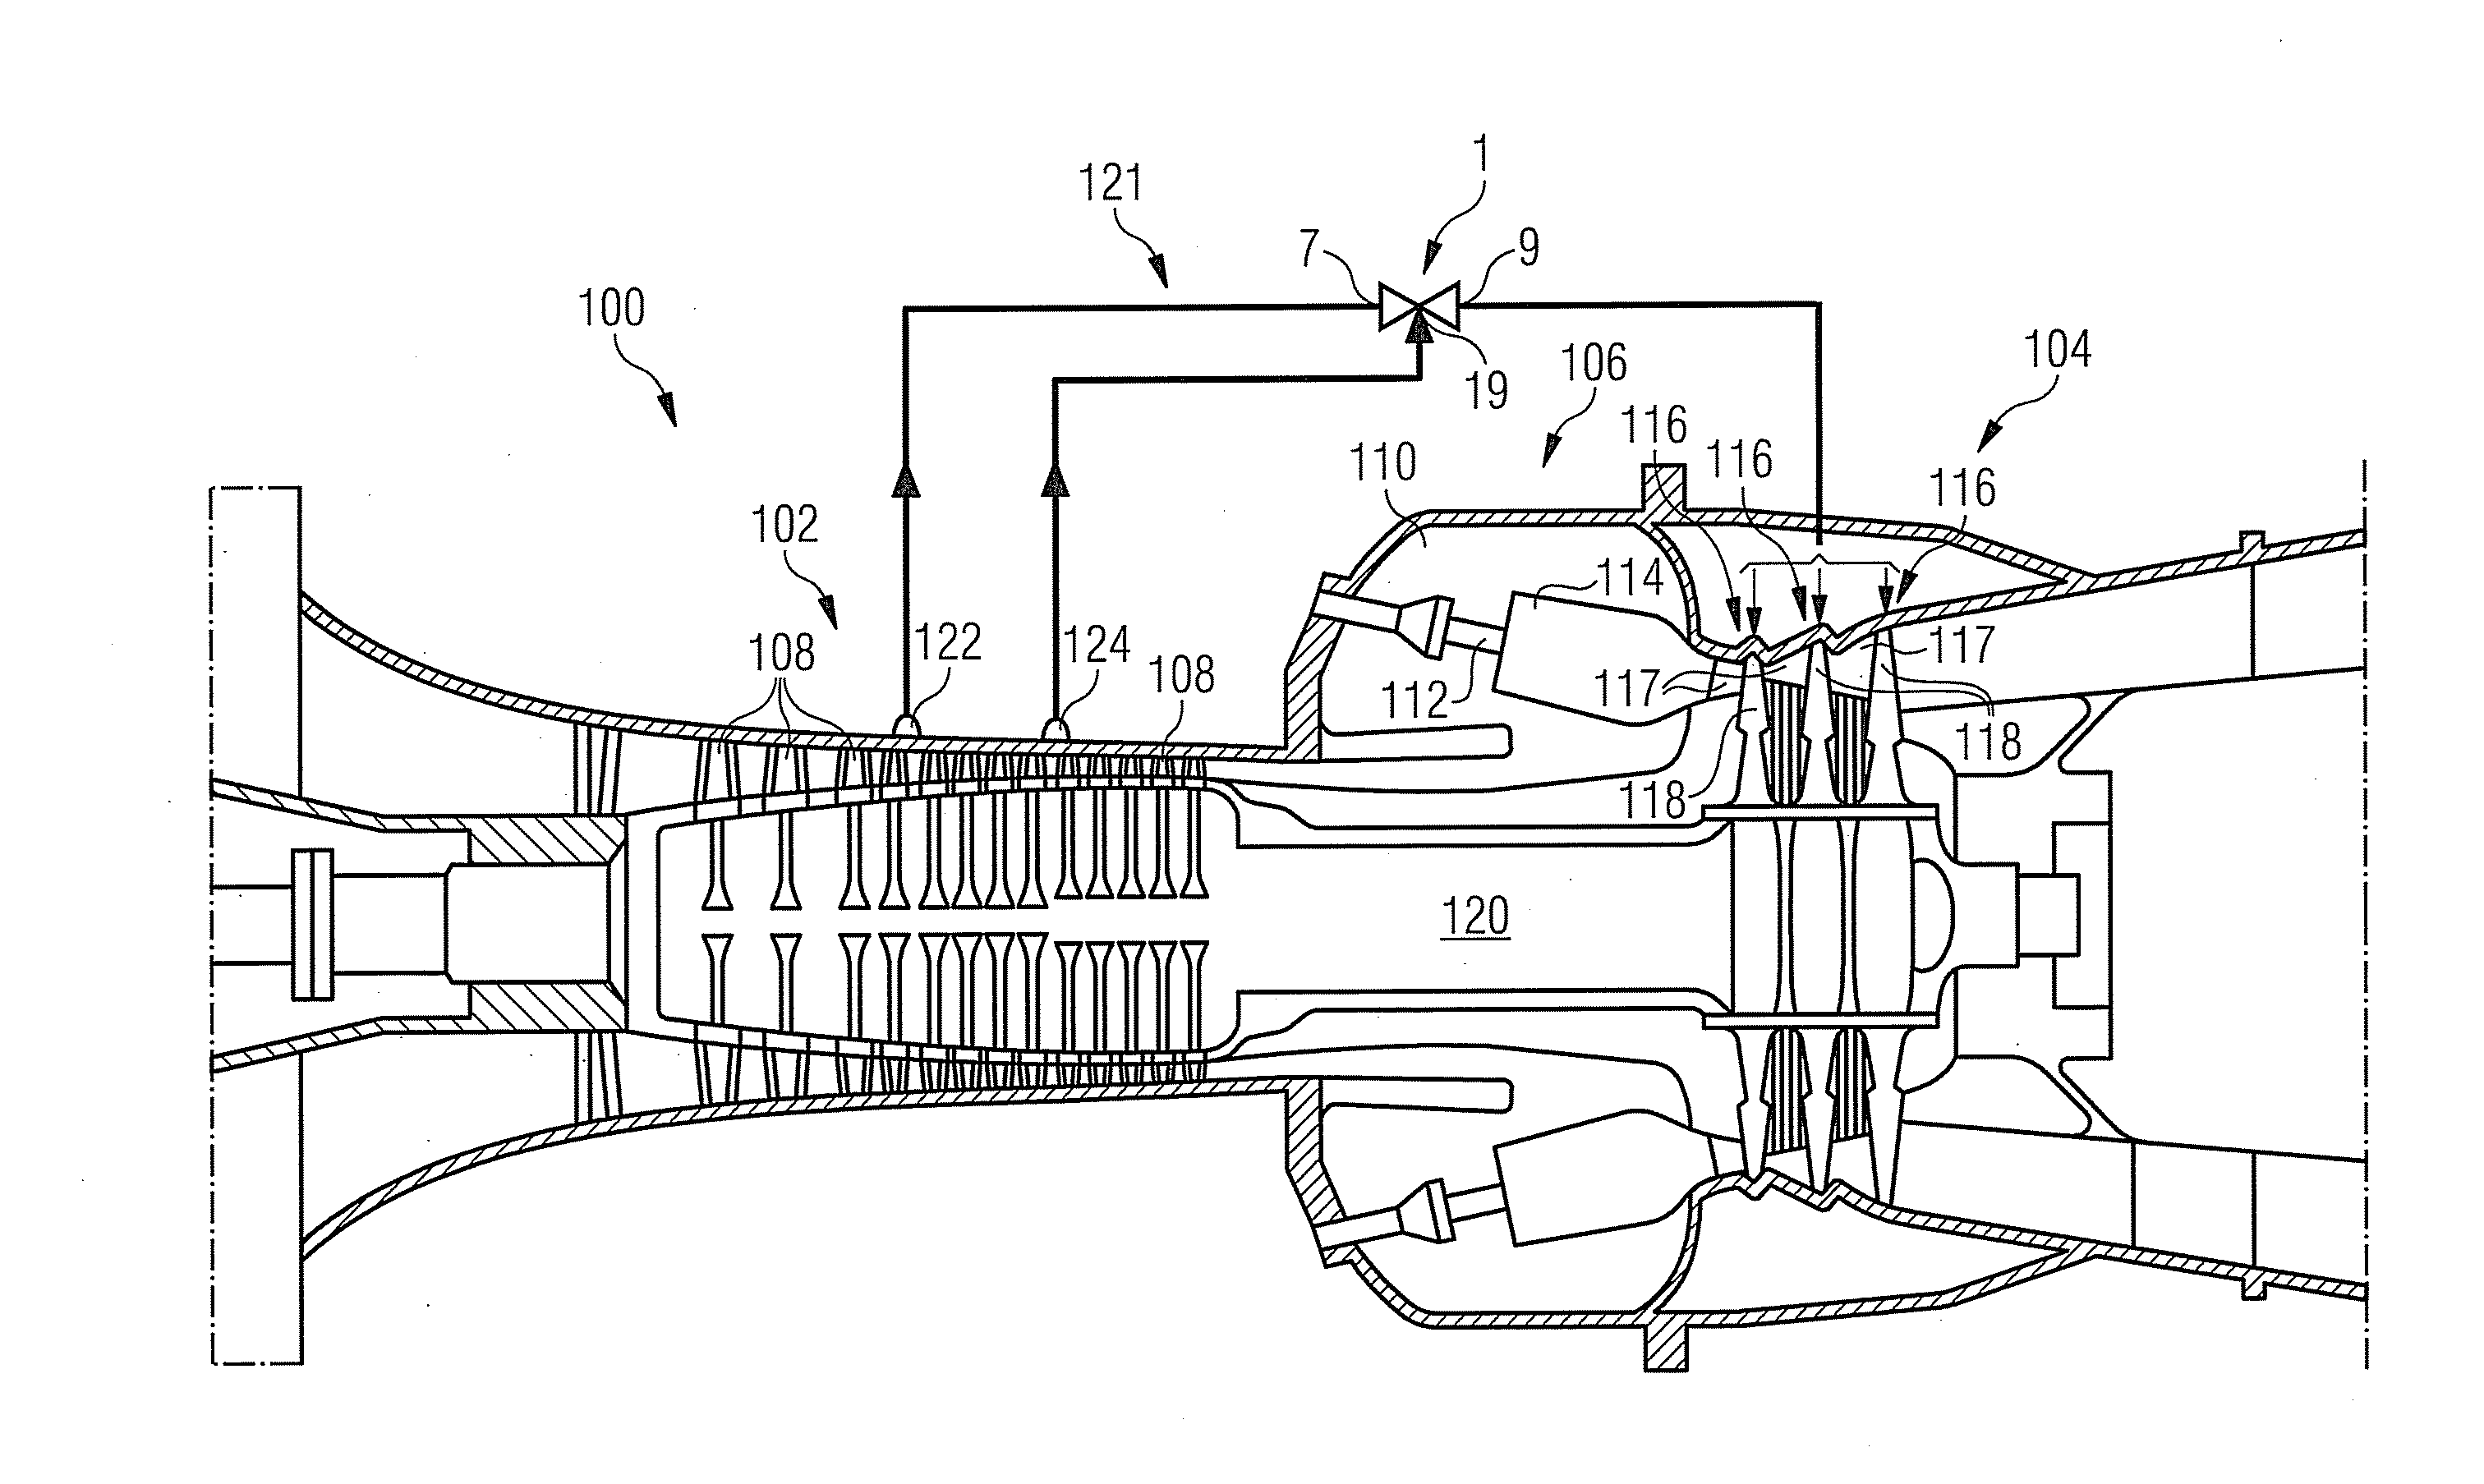 Turbine with fluidically-controlled valve and swirler with a bleed hole